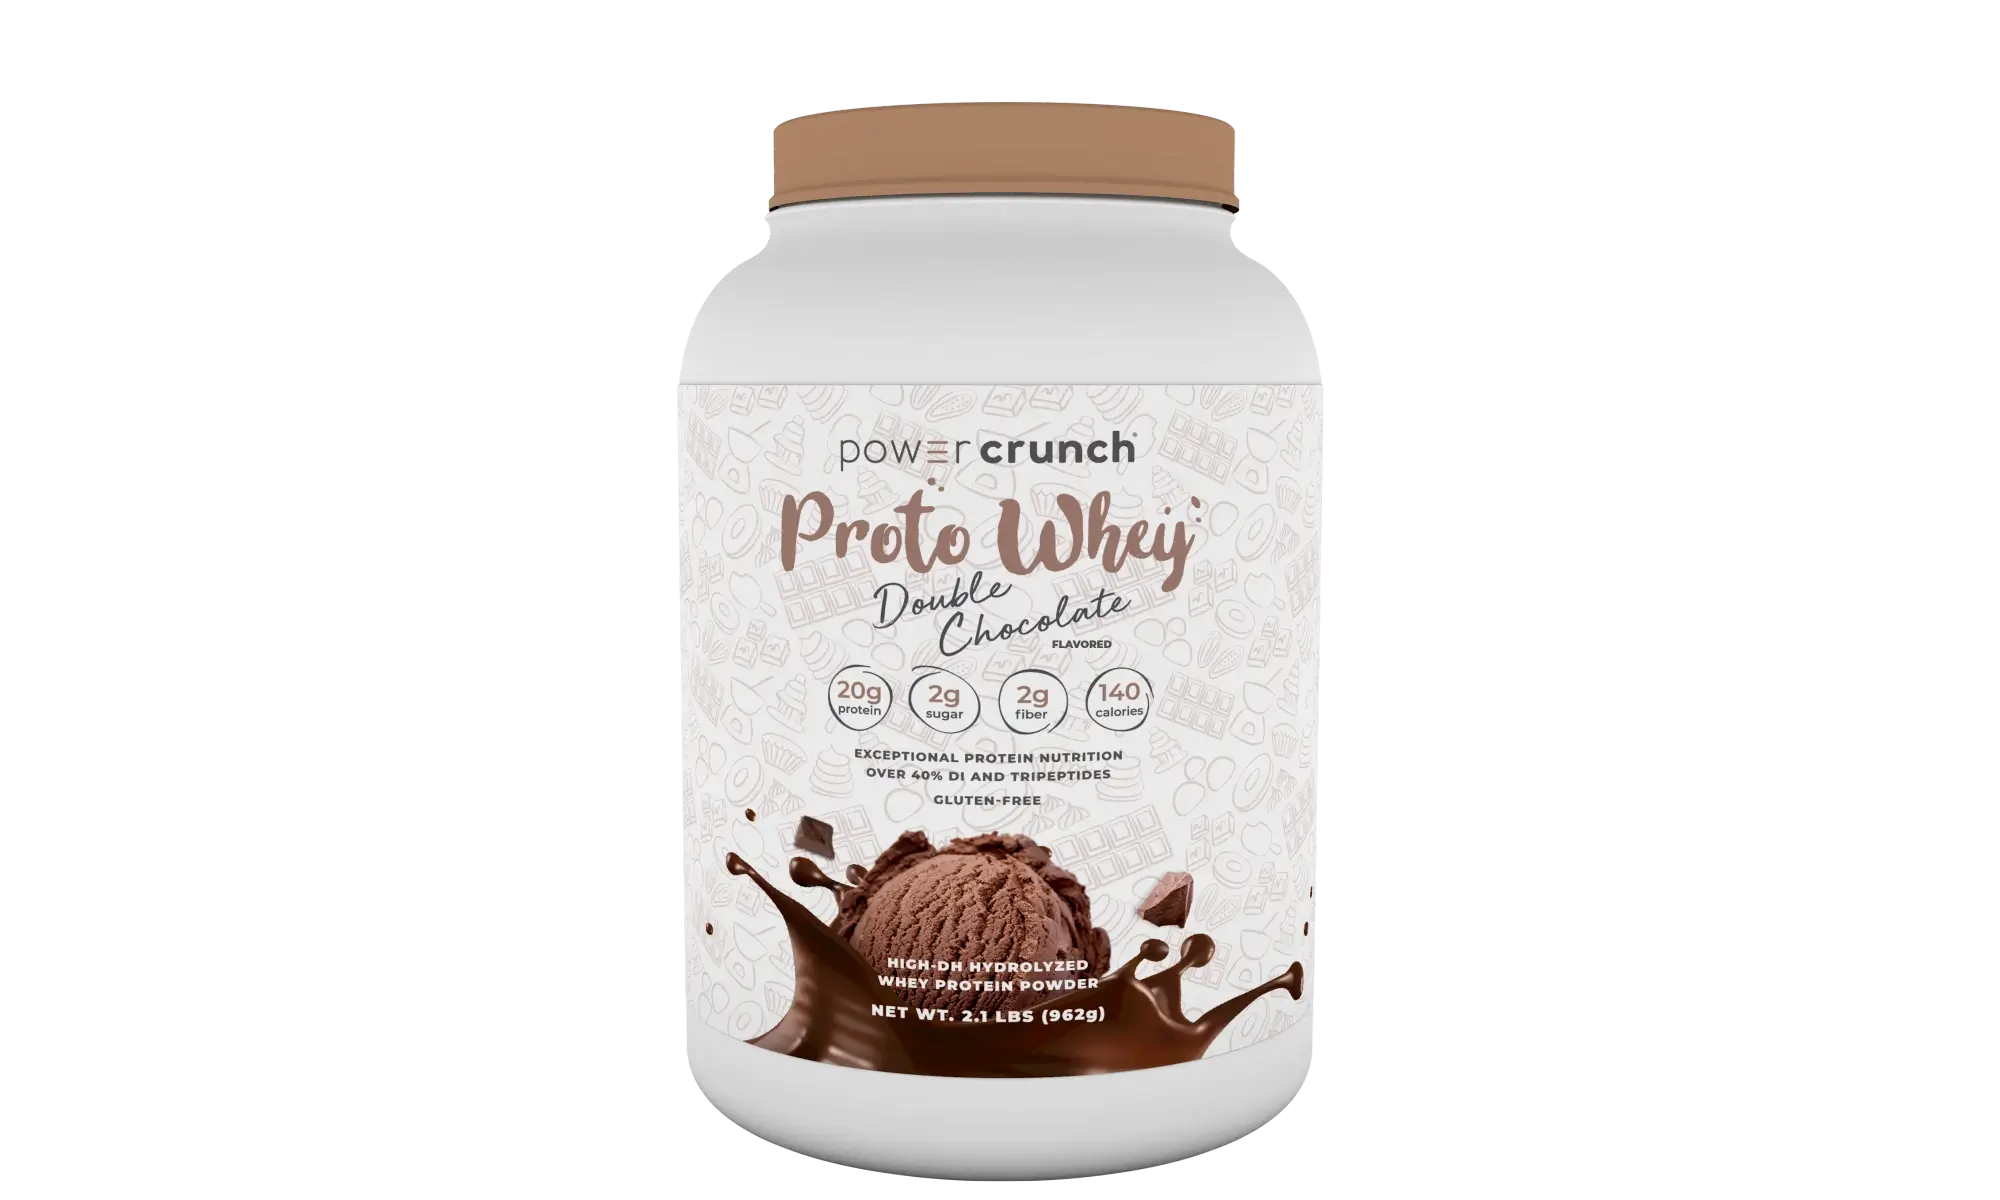 chocolate whey protein powder with 20g protein per serving